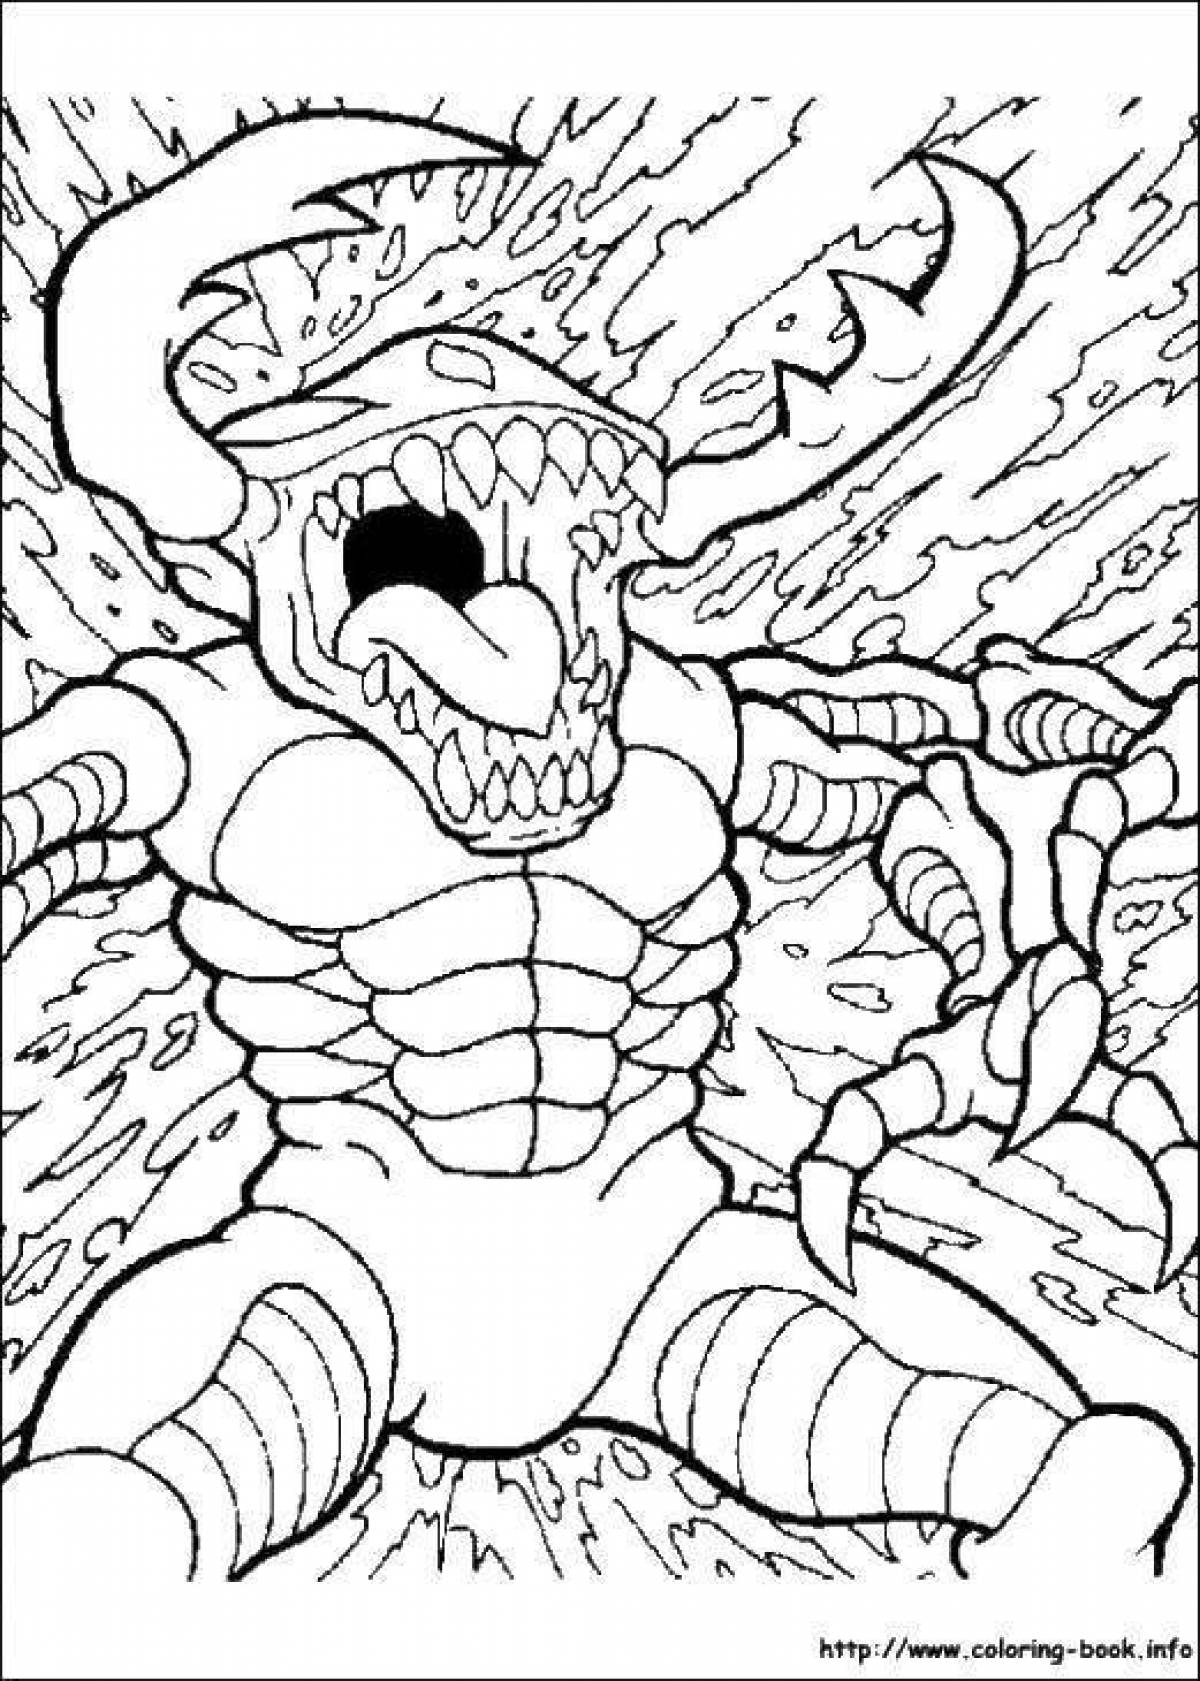 Disgusting monster coloring page